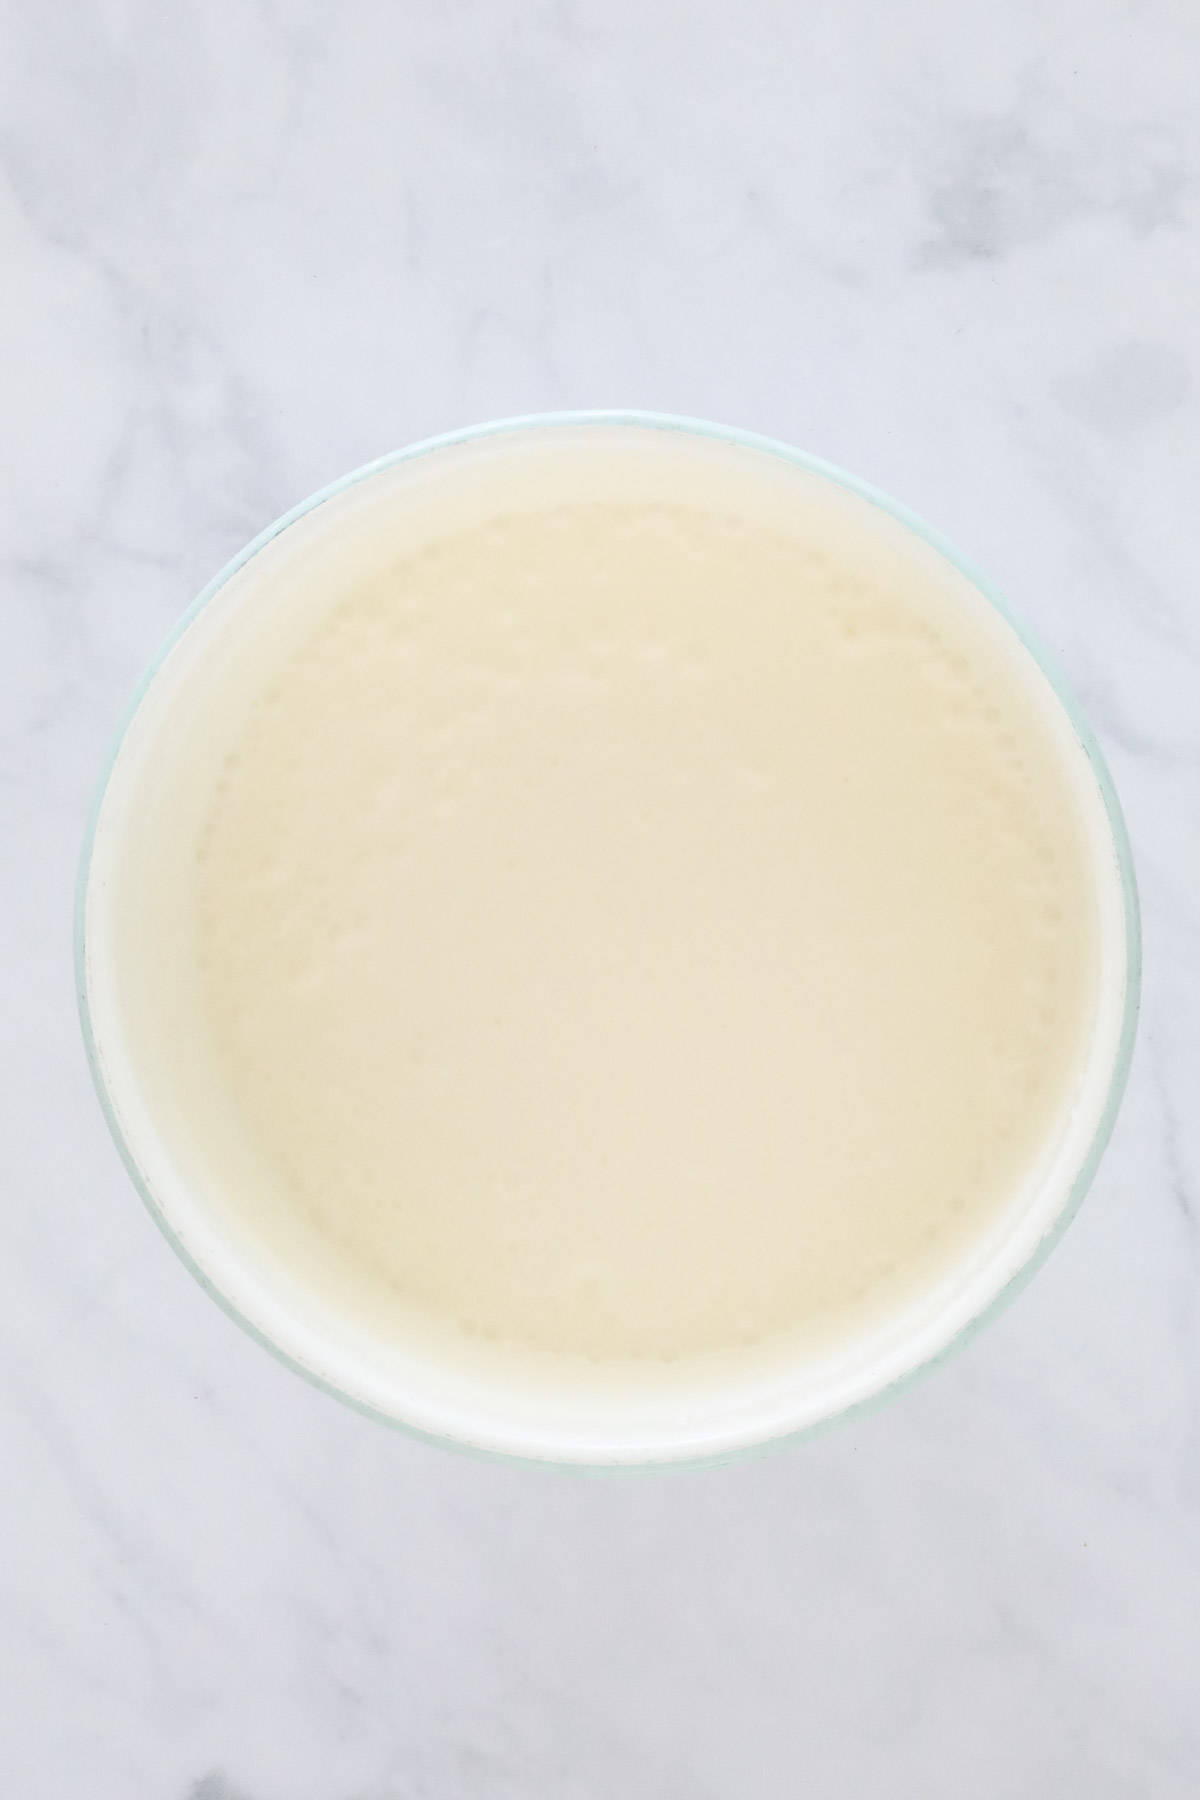 Condensed milk and cream beaten together in a white mixing bowl.